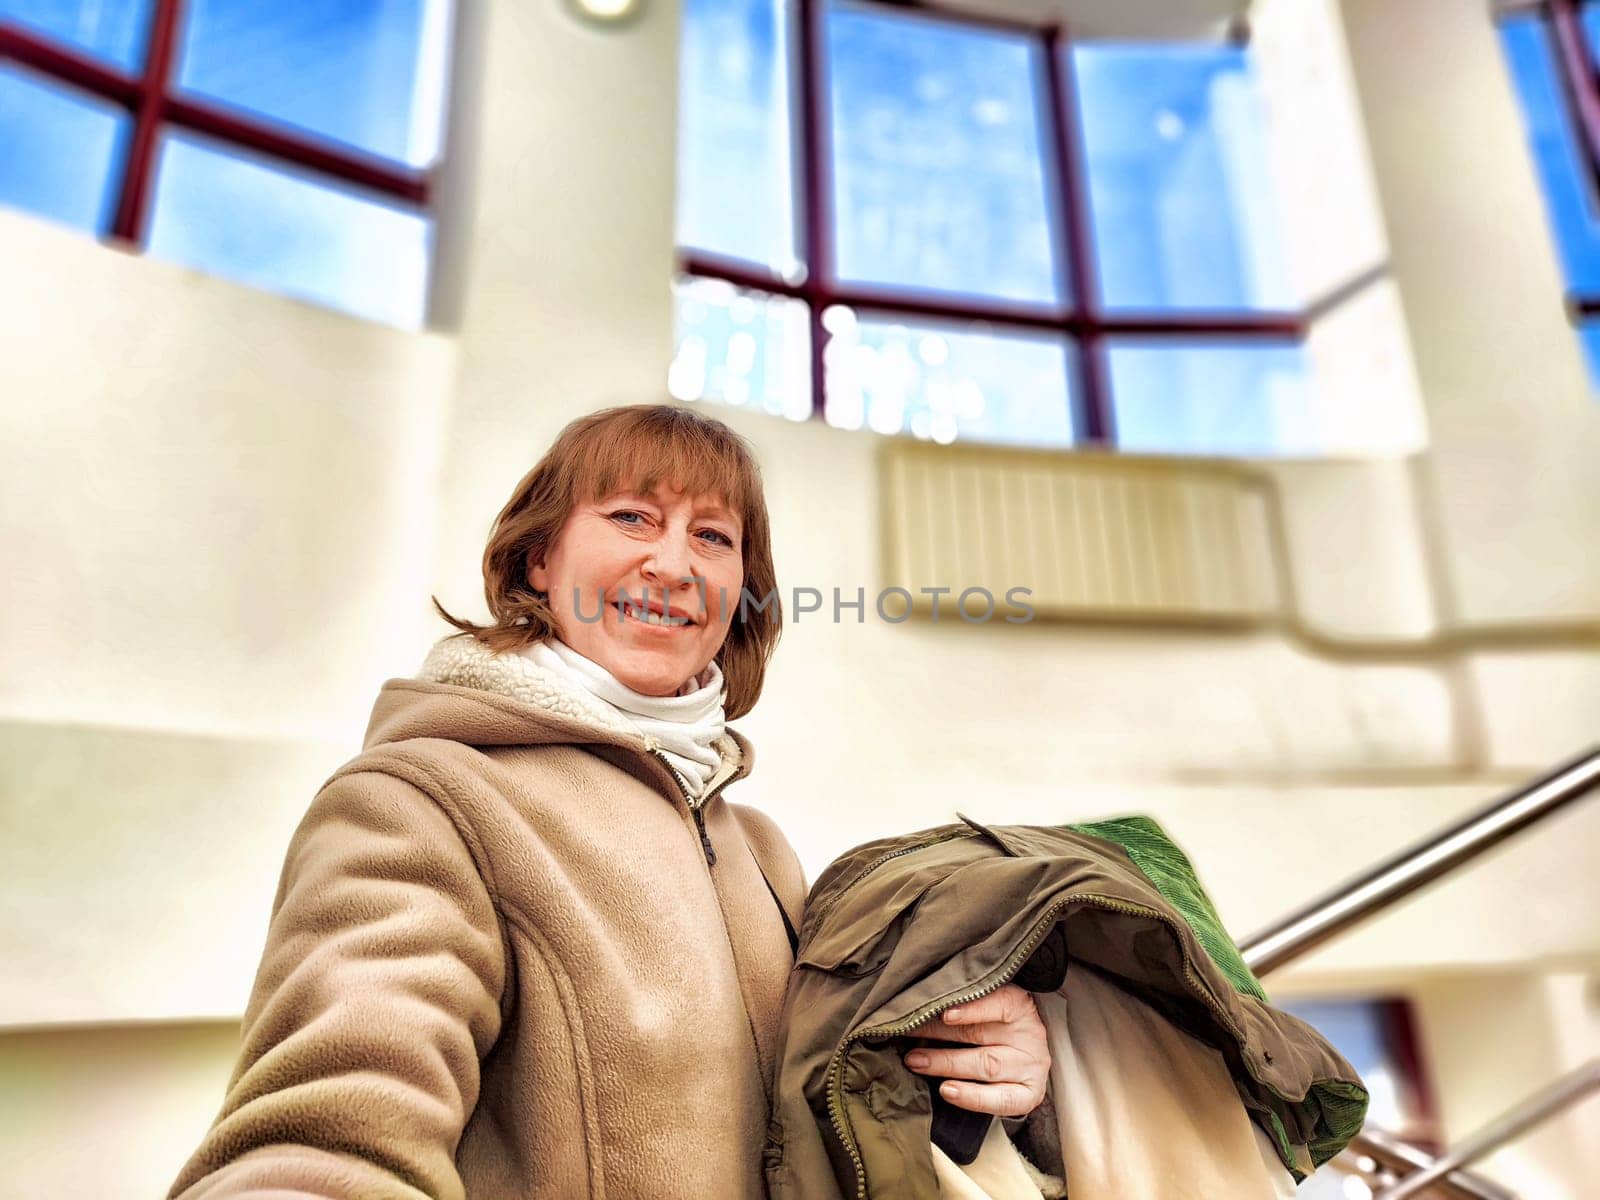 Middle-Aged Woman Shopping Second-Hand Clothes in Store. Smiling woman holding eco-friendly second-hand garments by keleny